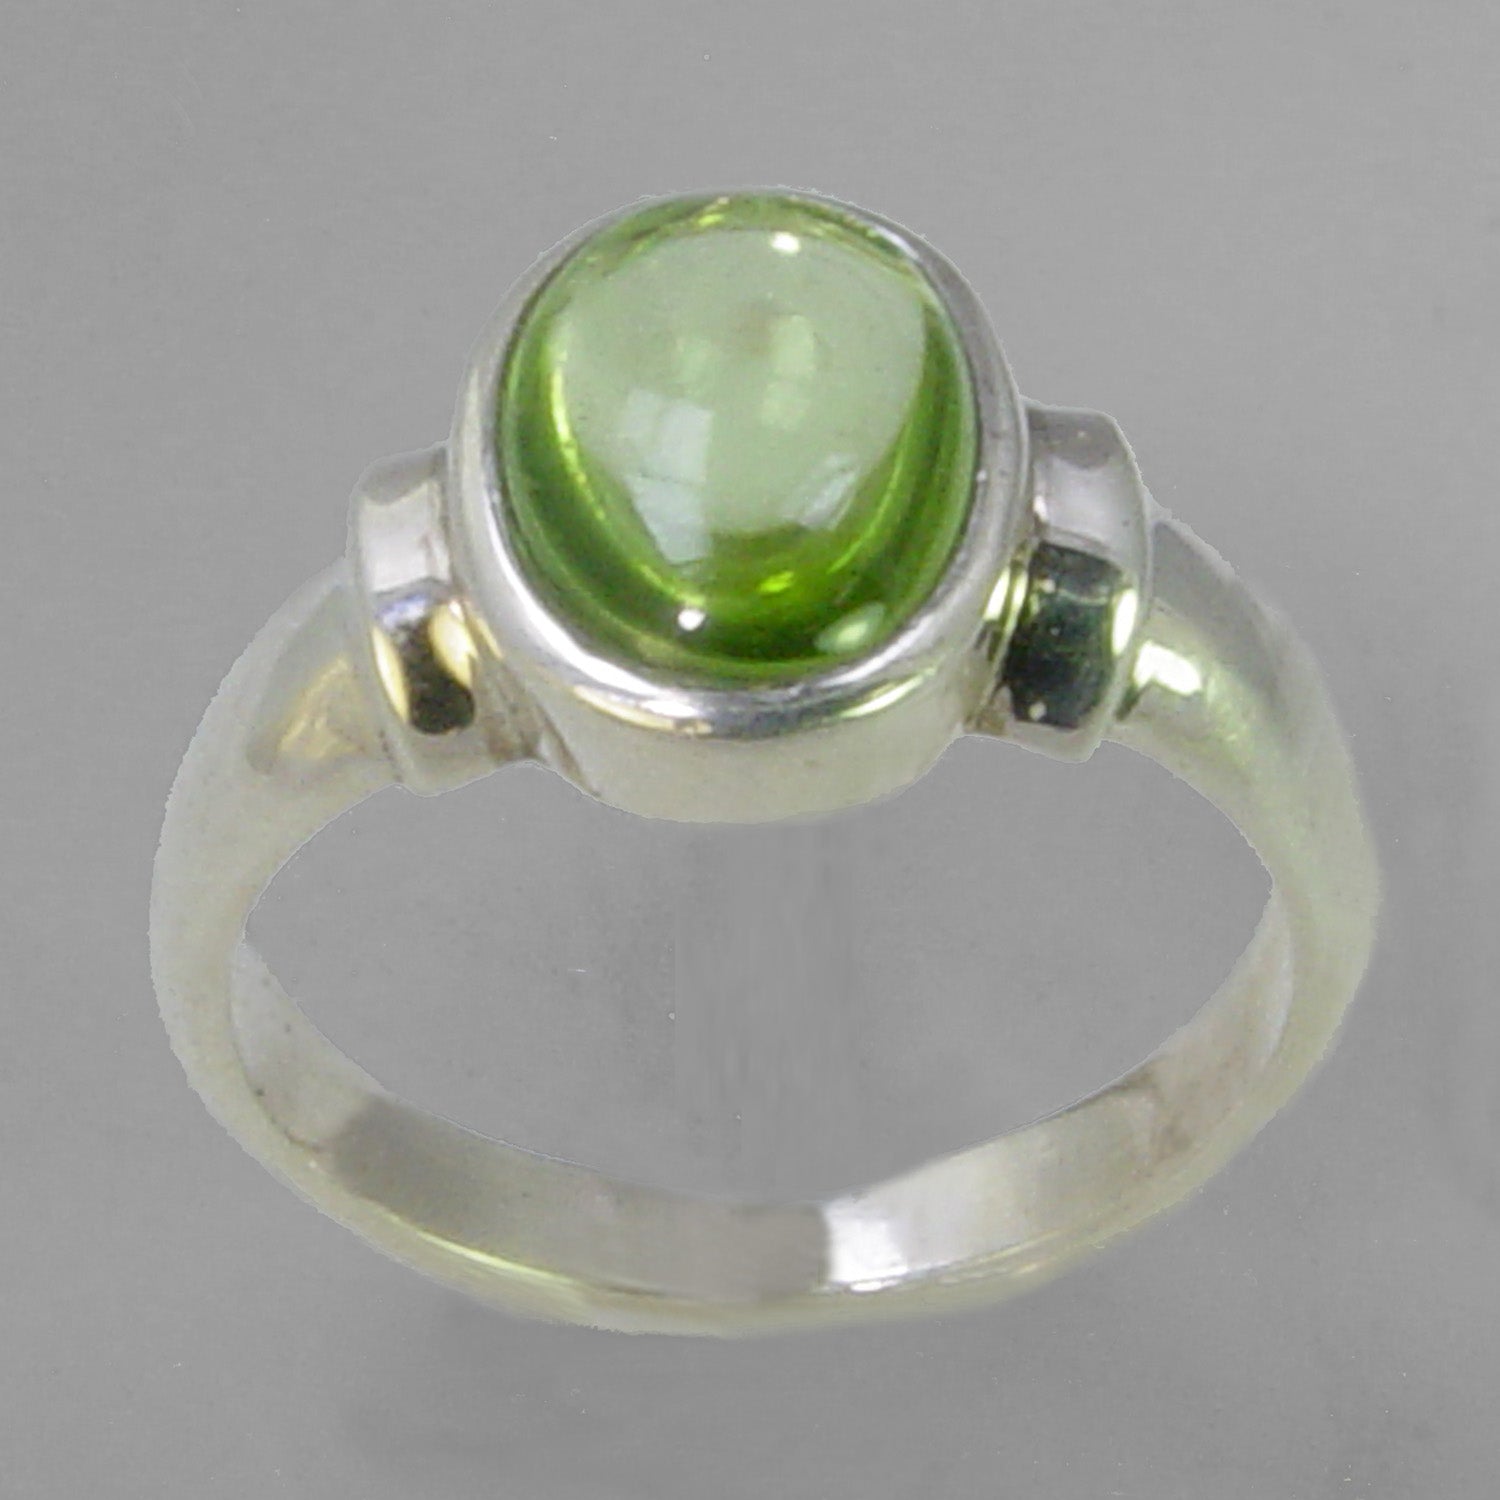 Peridot 4.1 ct Oval Cab Bezel Set Sterling Silver Ring, Size 8.25